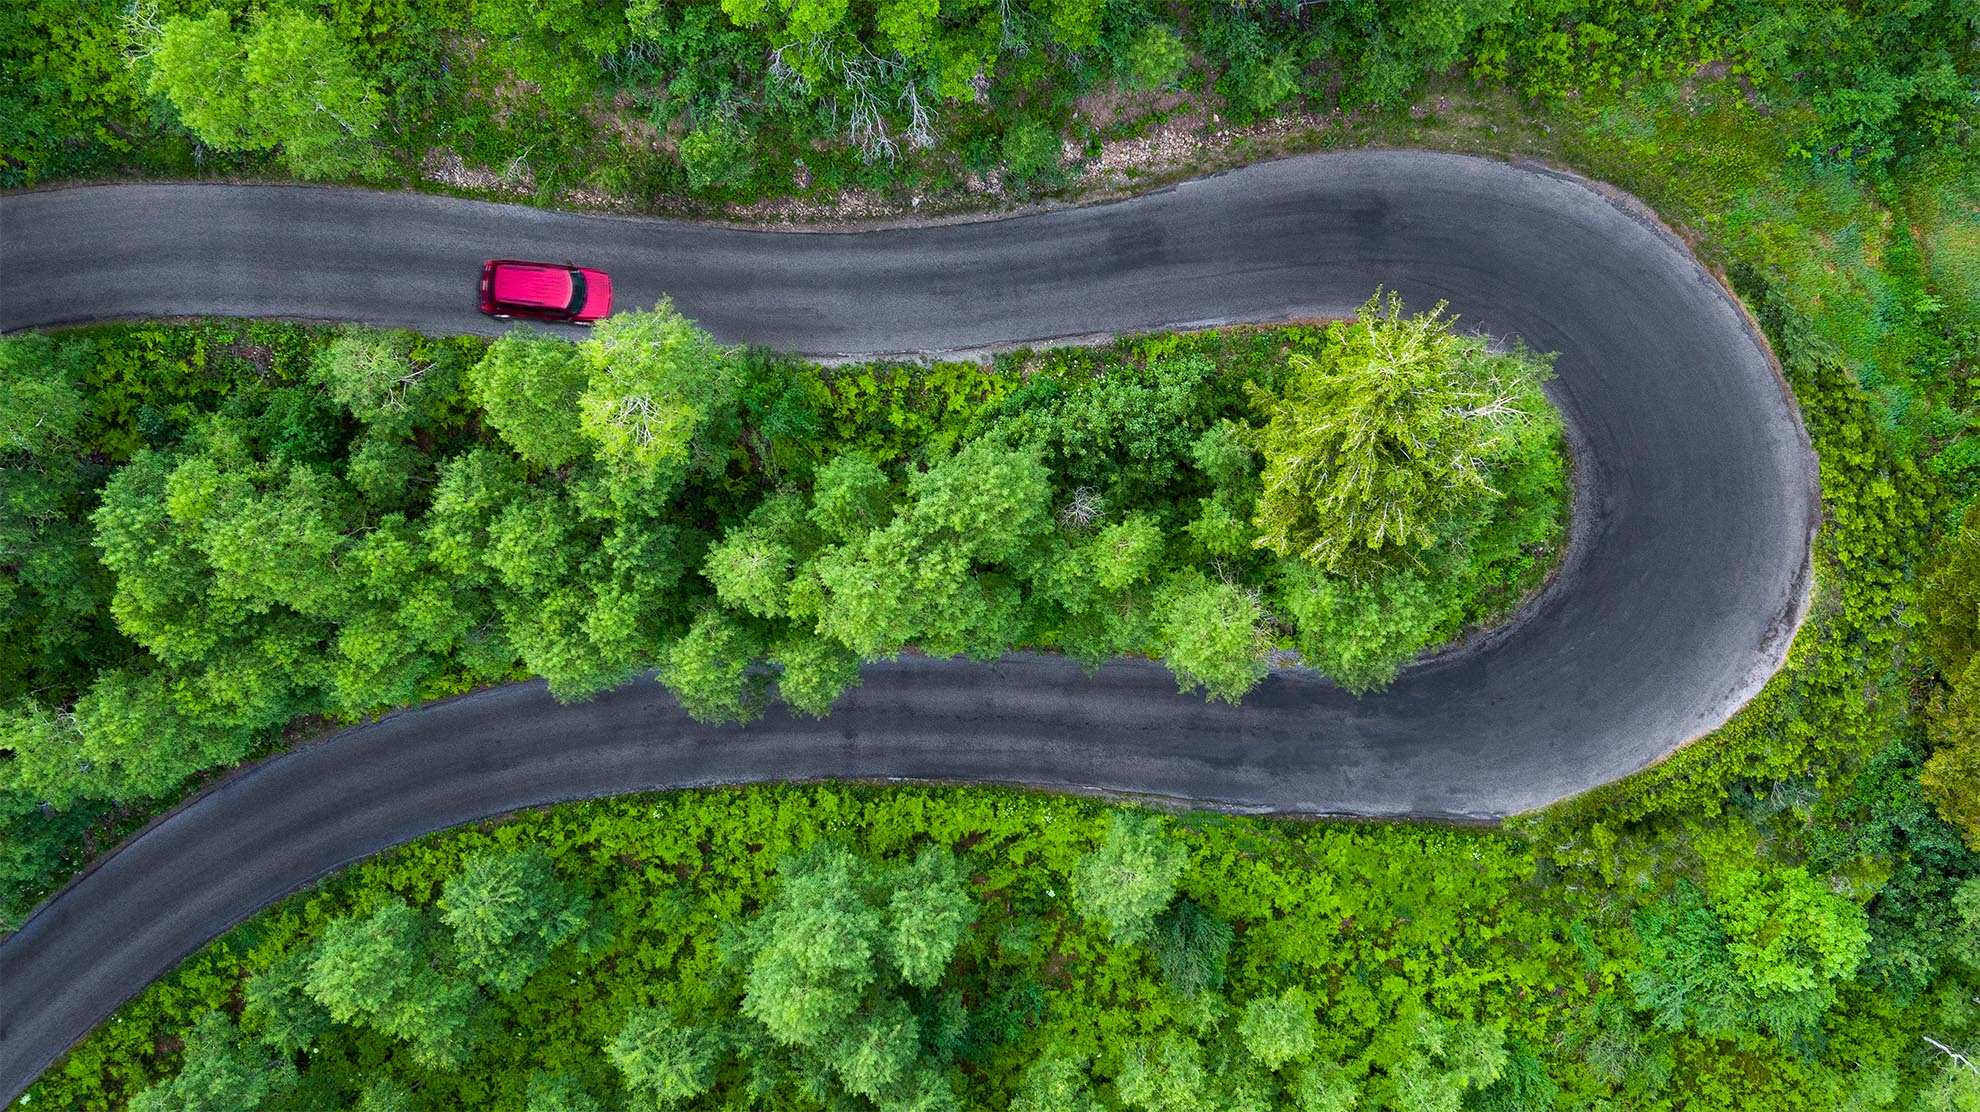 Drone photograph of birds eye view of red vehicle traveling on a horse shoe road